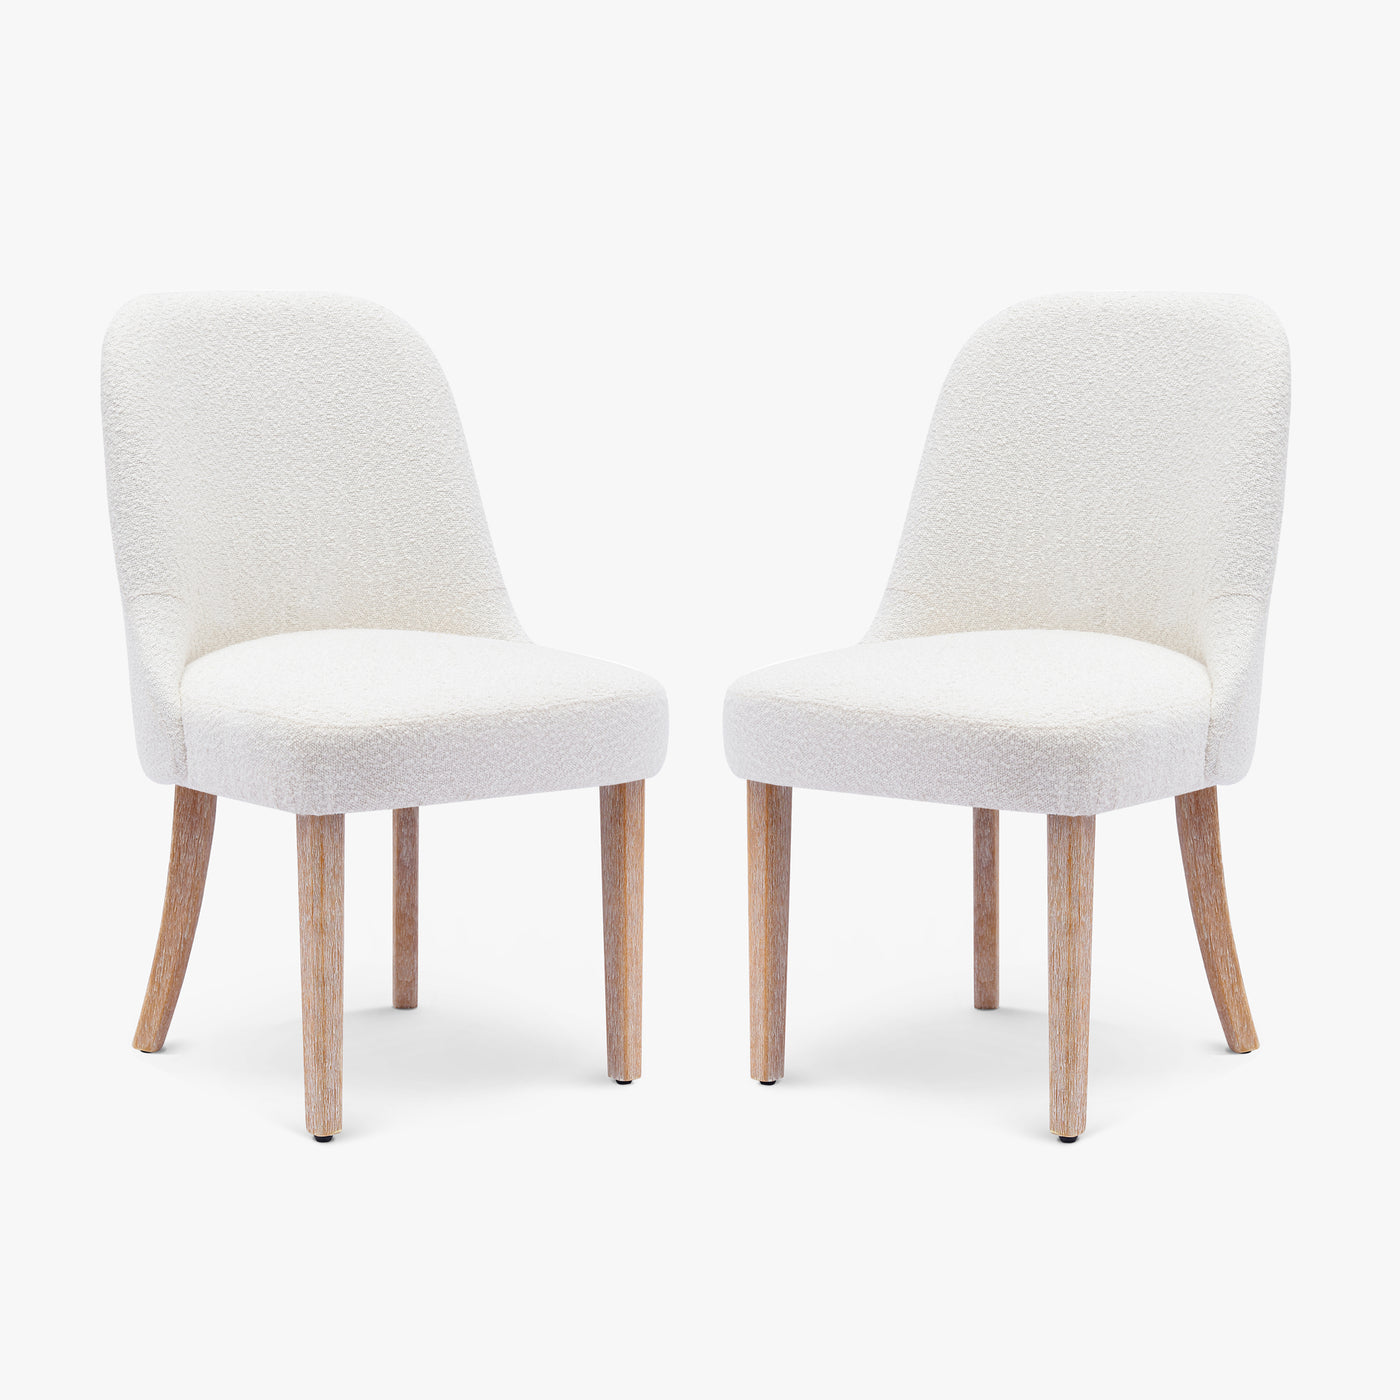 Genevieve Mid-Century Modern Upholstered Boucle Dining Chair (Set of 2)